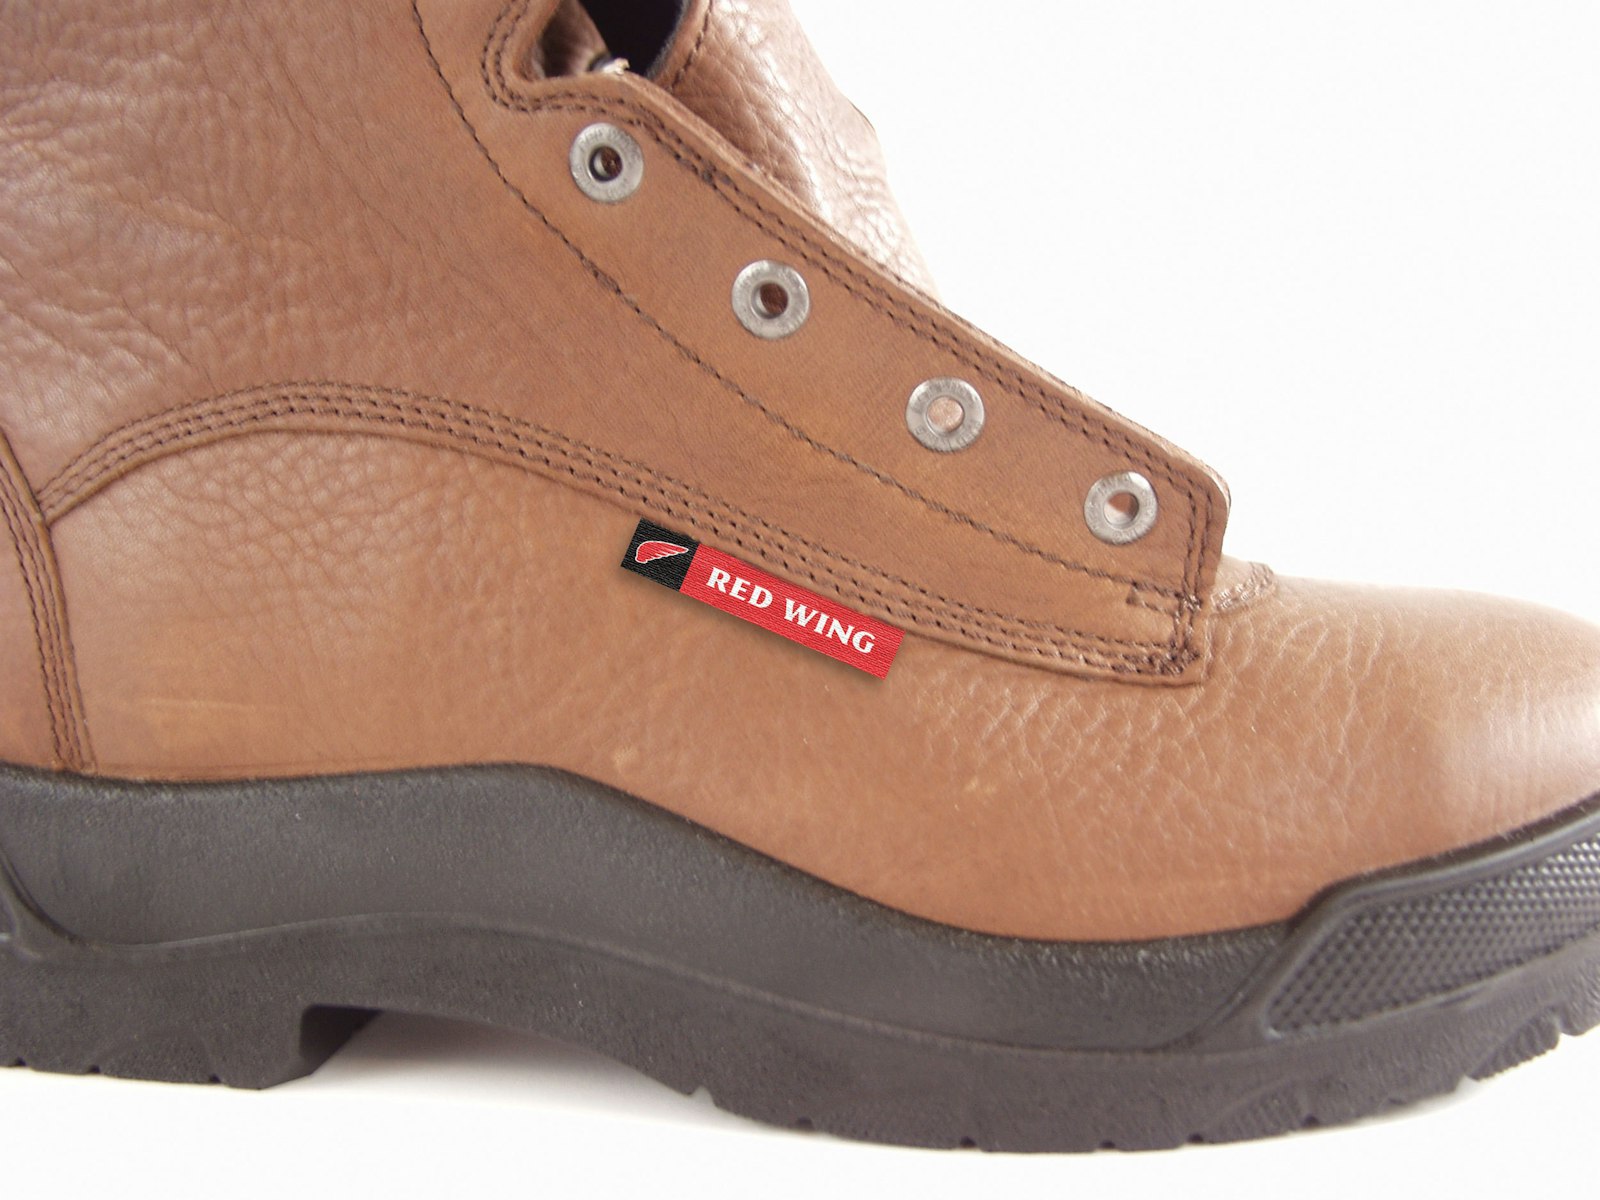 The Red Wing Shoes brand design logo on a boot tag.